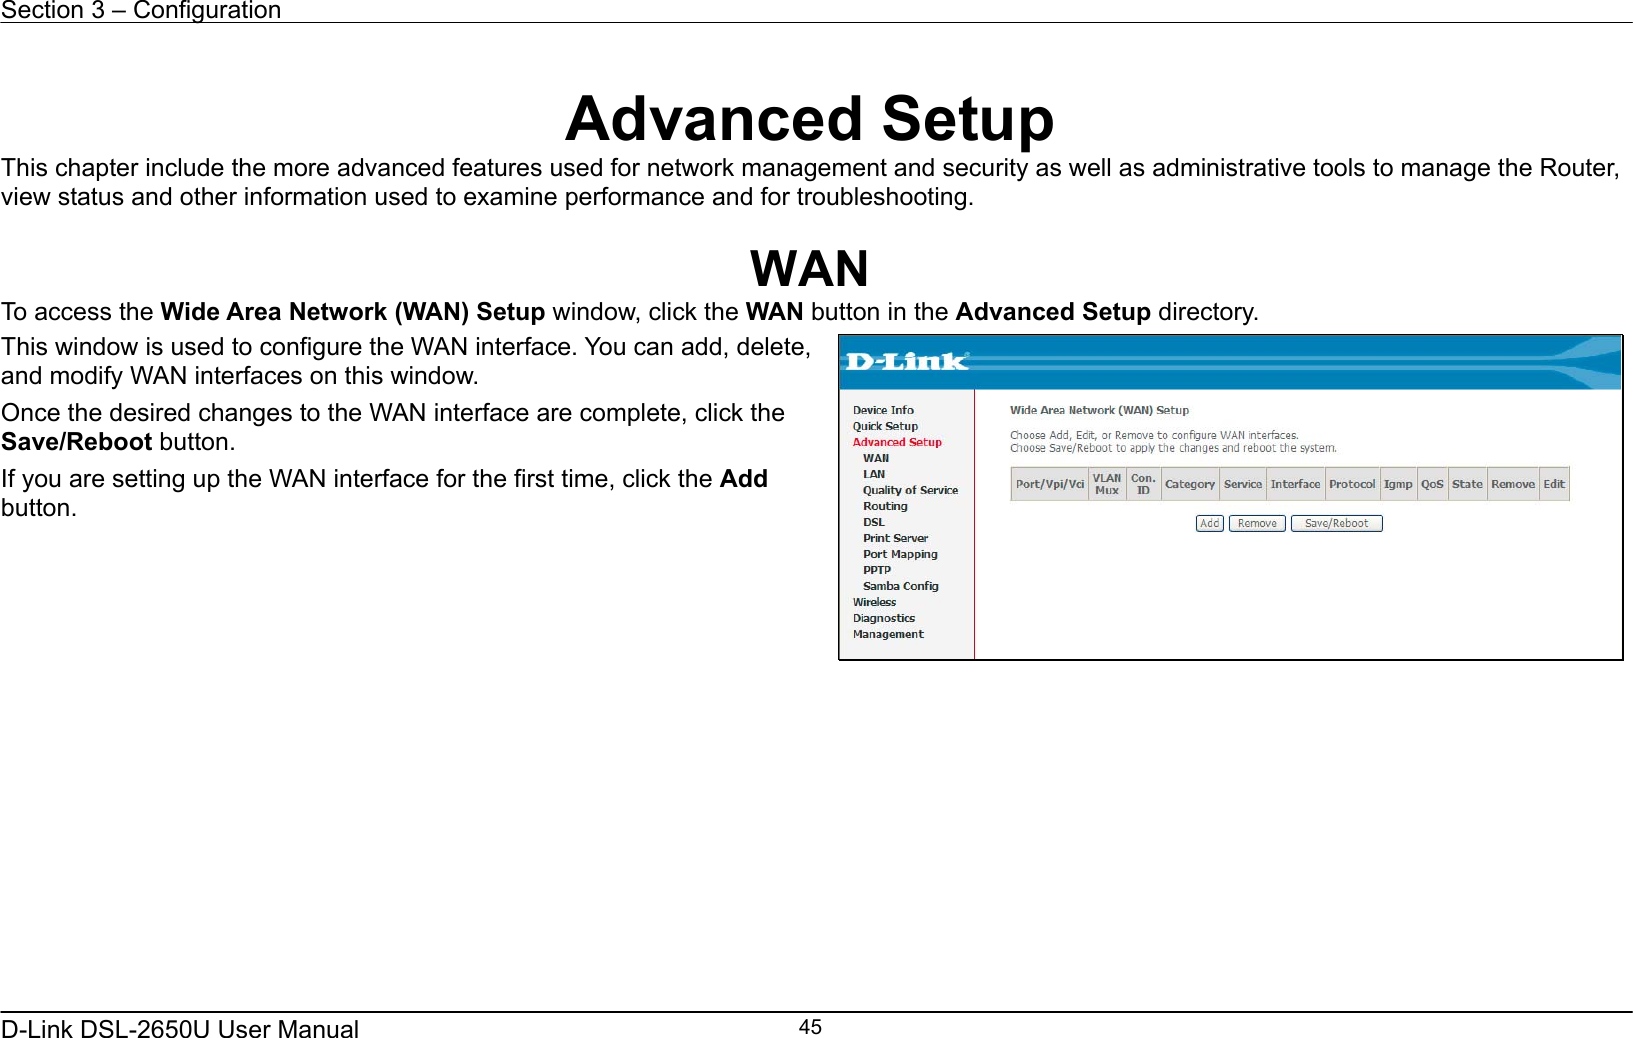 Section 3 – Configuration   D-Link DSL-2650U User Manual    45  Advanced Setup This chapter include the more advanced features used for network management and security as well as administrative tools to manage the Router, view status and other information used to examine performance and for troubleshooting.  WAN To access the Wide Area Network (WAN) Setup window, click the WAN button in the Advanced Setup directory. This window is used to configure the WAN interface. You can add, delete, and modify WAN interfaces on this window.   Once the desired changes to the WAN interface are complete, click the Save/Reboot button. If you are setting up the WAN interface for the first time, click the Add button.      